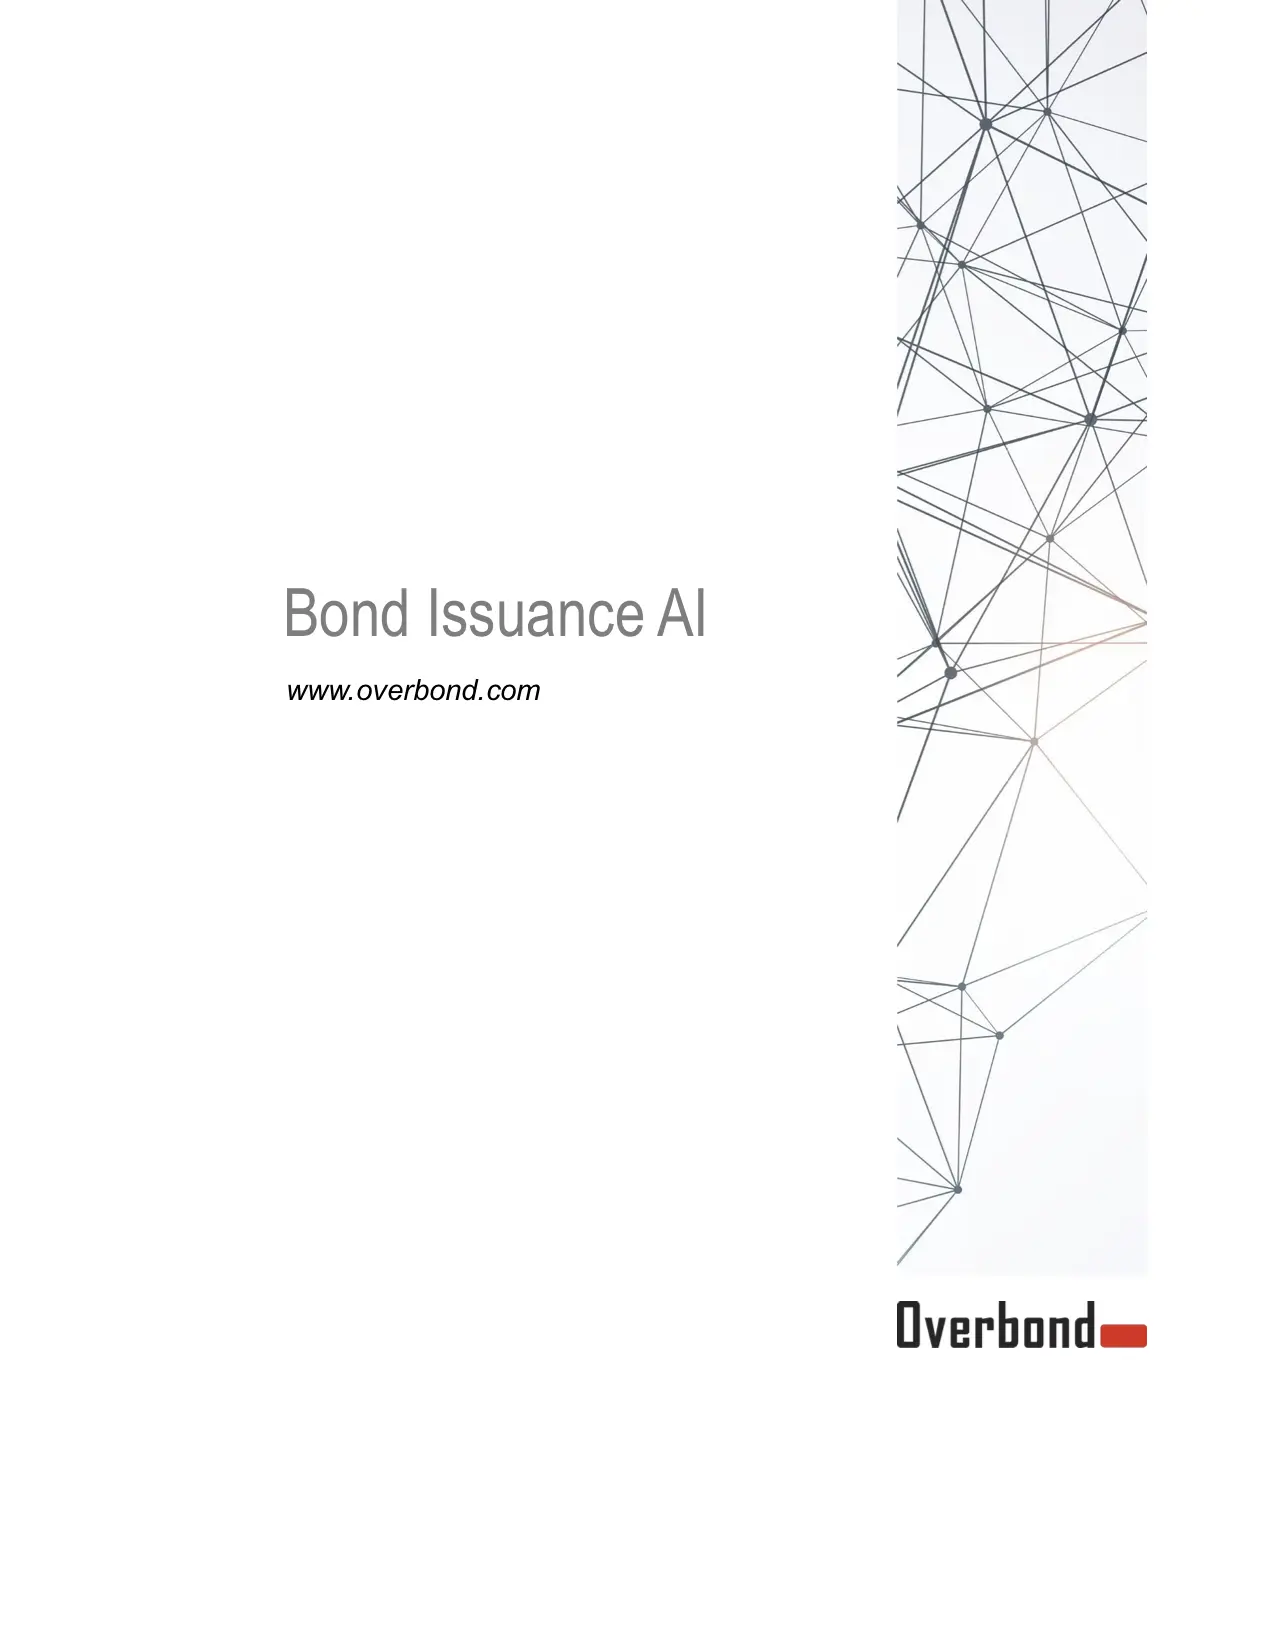 Overbond COBI Issuance White Paper